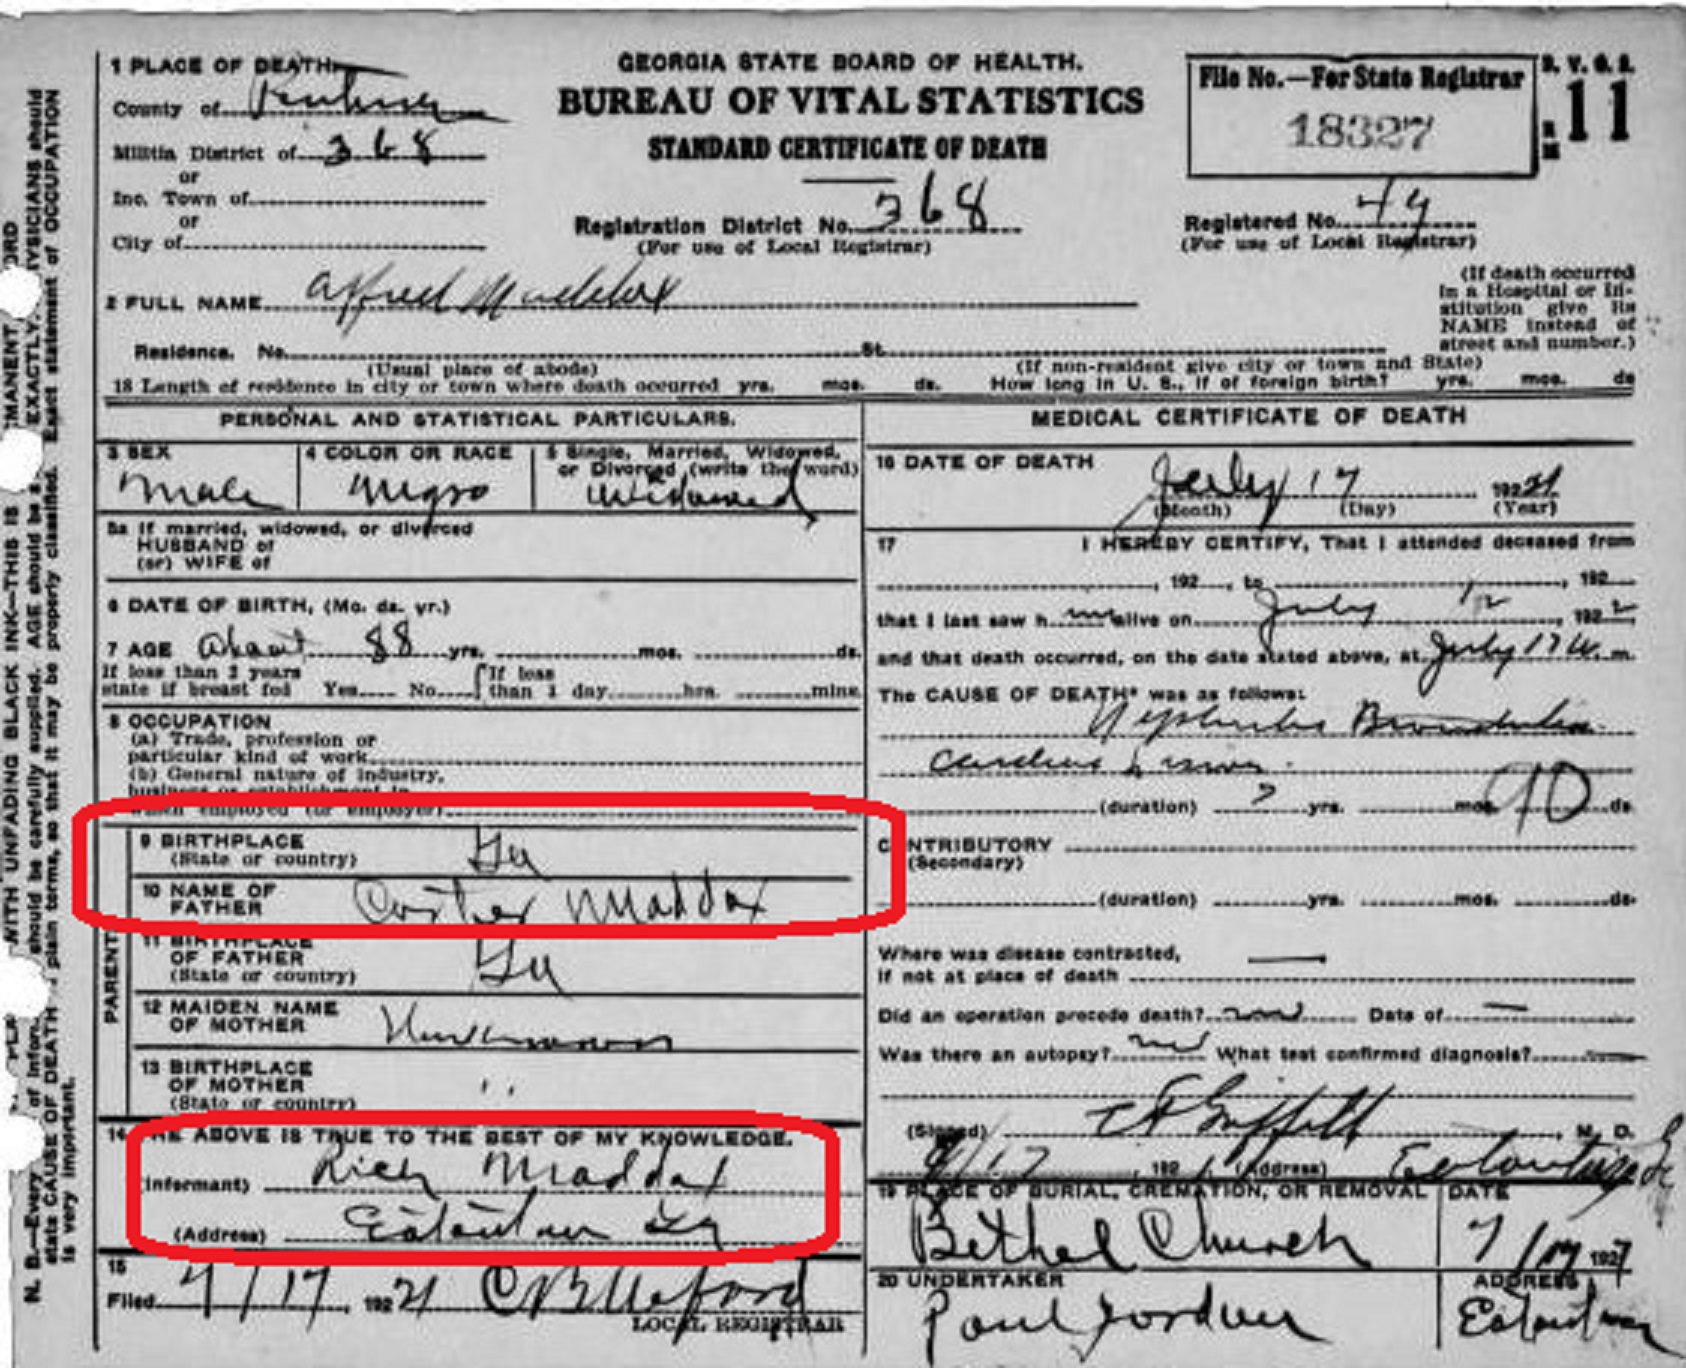 Alfred Maddox - Death Certificate (with Carter circled)